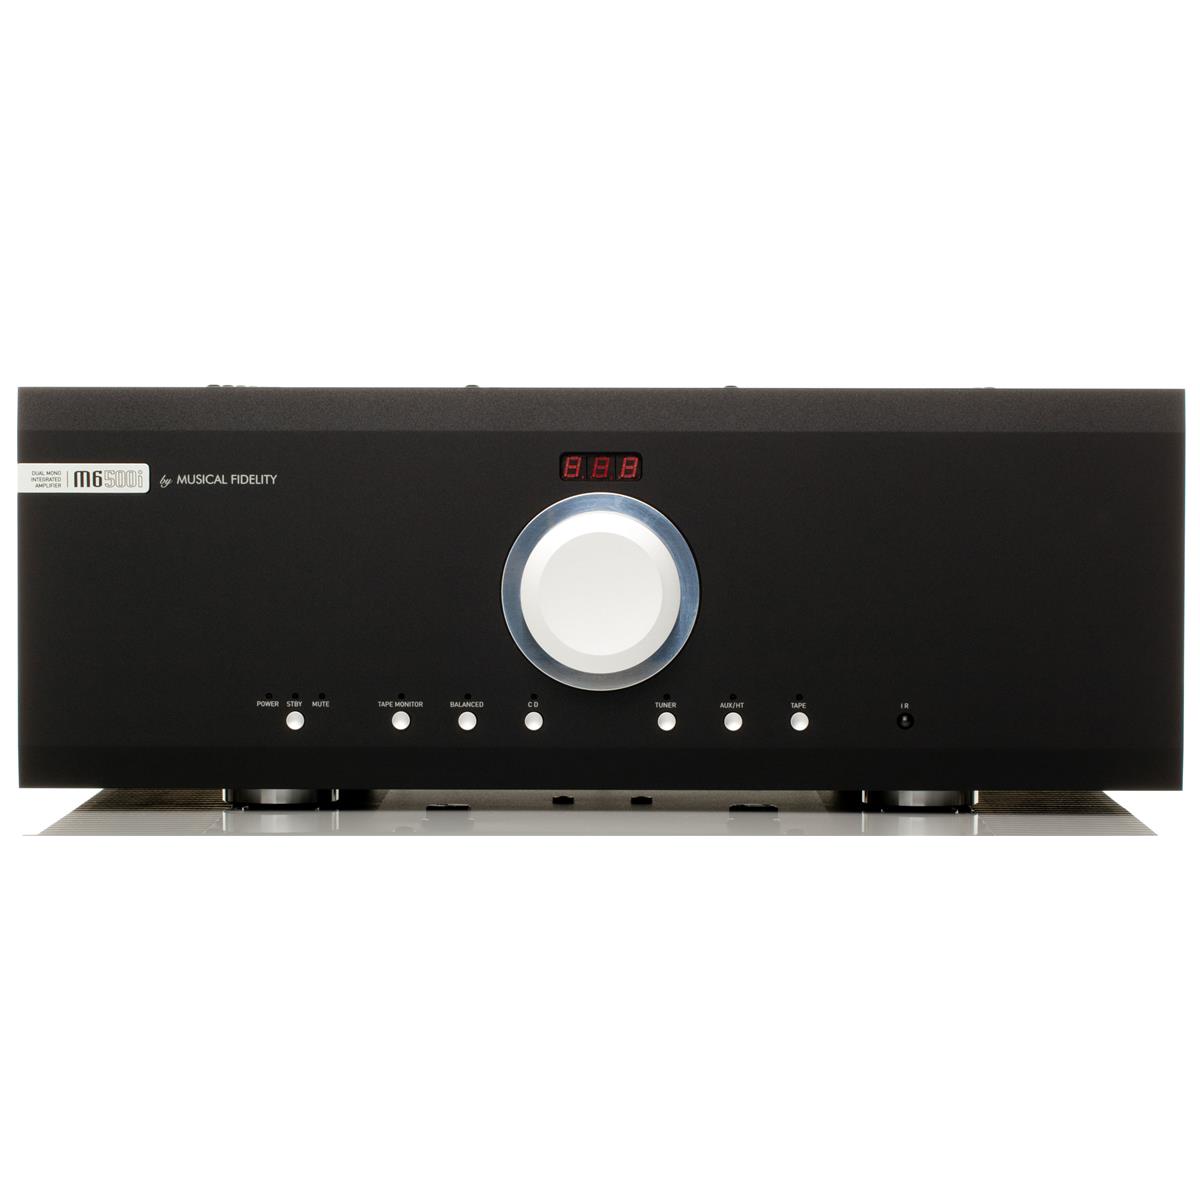 

Musical Fidelity M6si500 500W Integrated Amplifier, Black